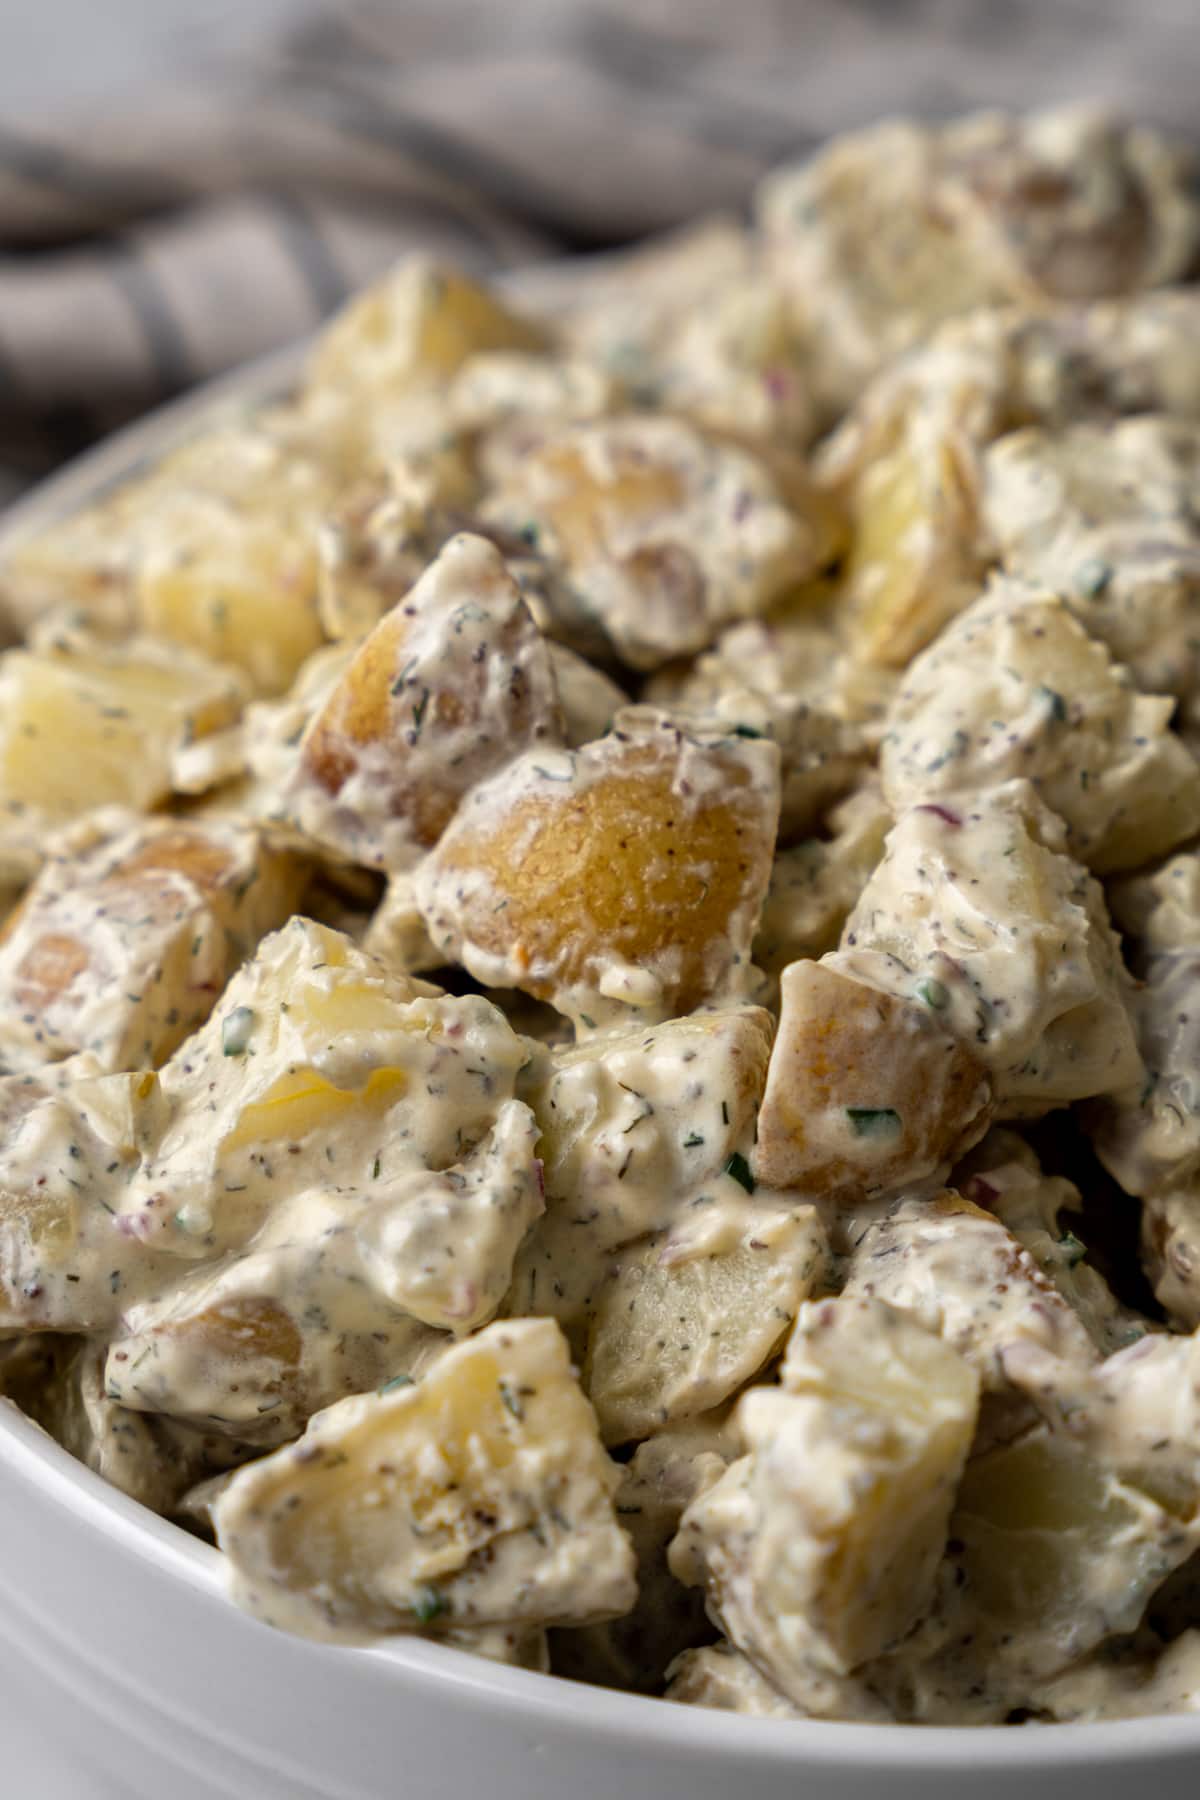 Potato salad piled high in a bowl.